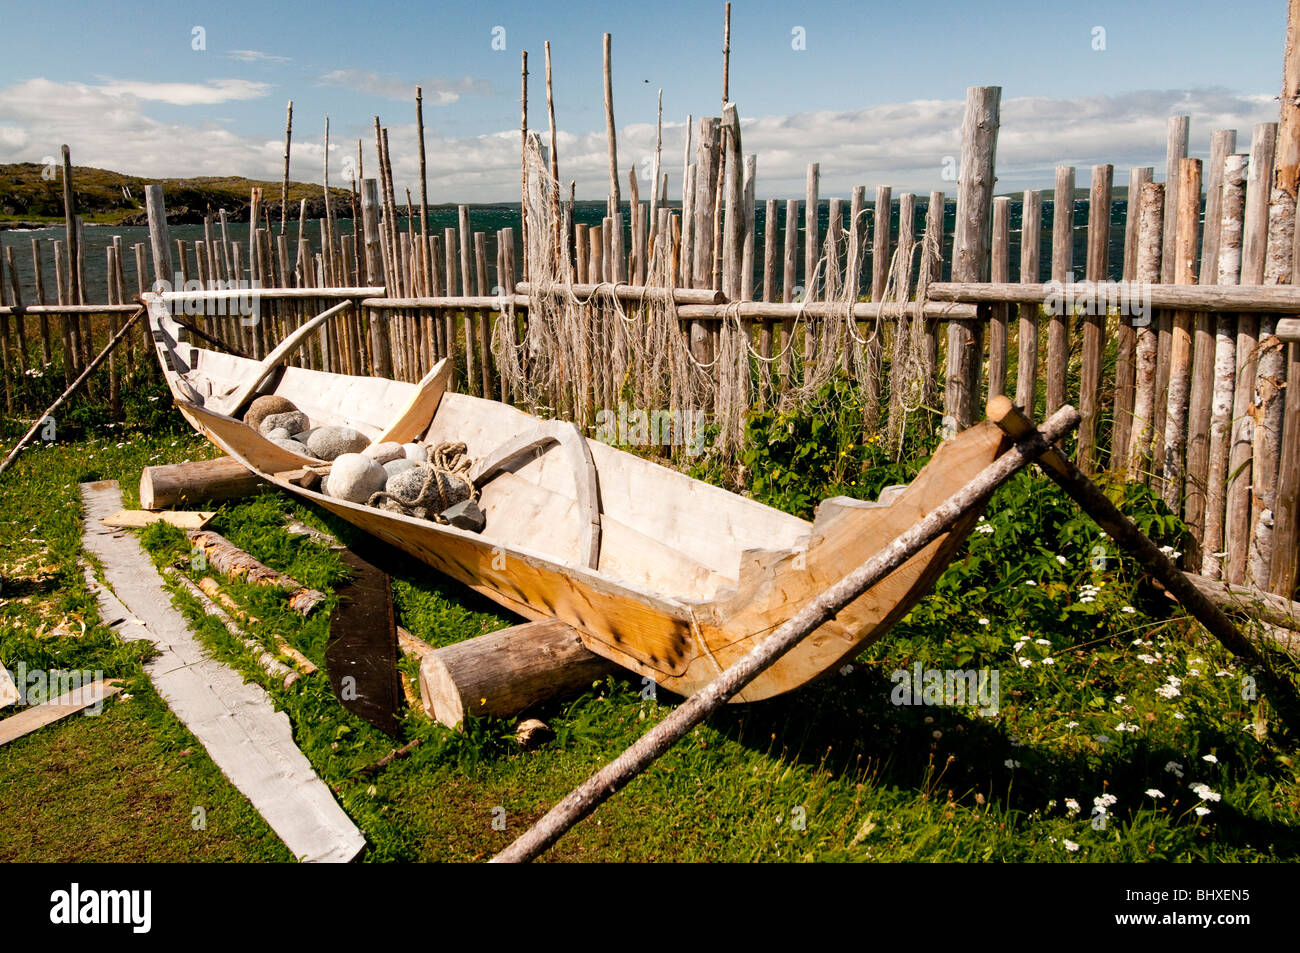 NEWFOUNDLAND, Viking Site, L'ANSE Aux MEADOWS Dug out Viking boats near sod huts. Unesco World Heritage Site Stock Photo